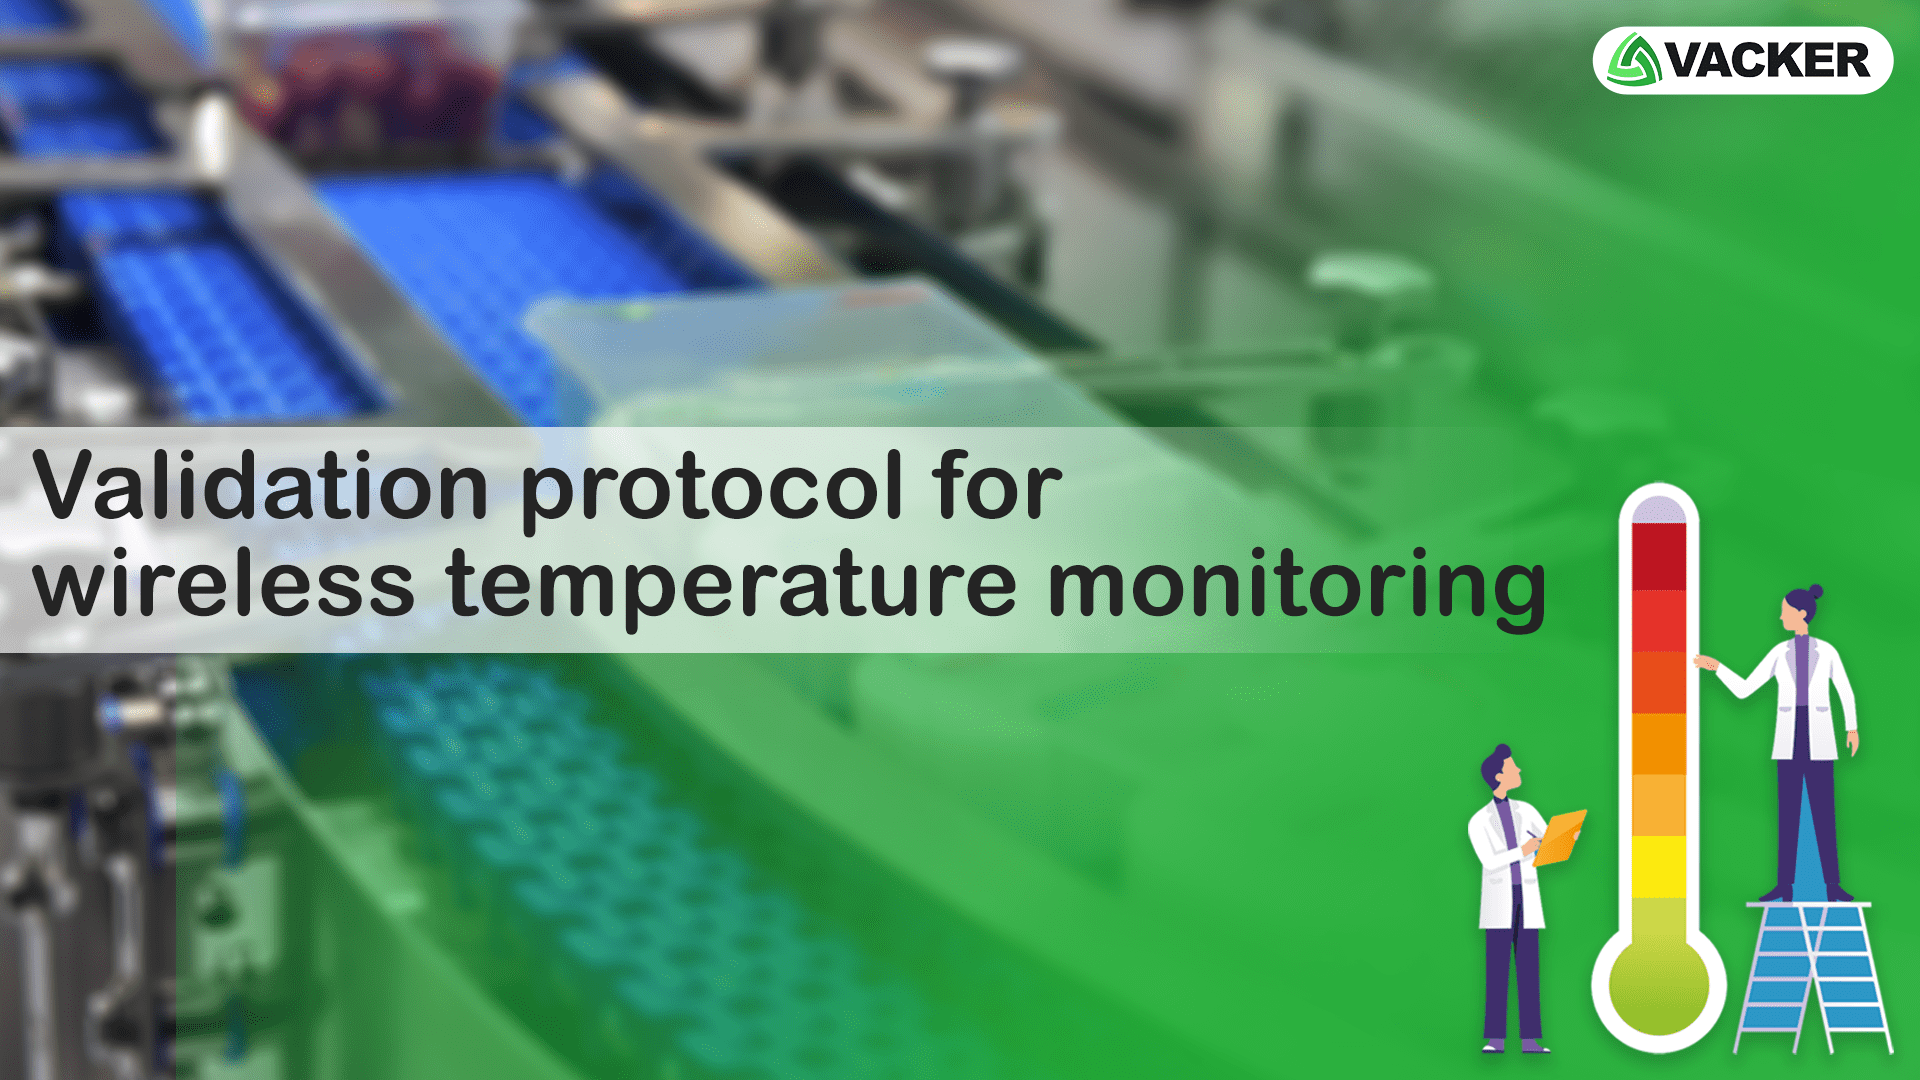 https://www.temperaturemonitoringuae.com/wp-content/uploads/2015/02/Validation-protocol-for-wireless-temperature-monitoring-Banner.png